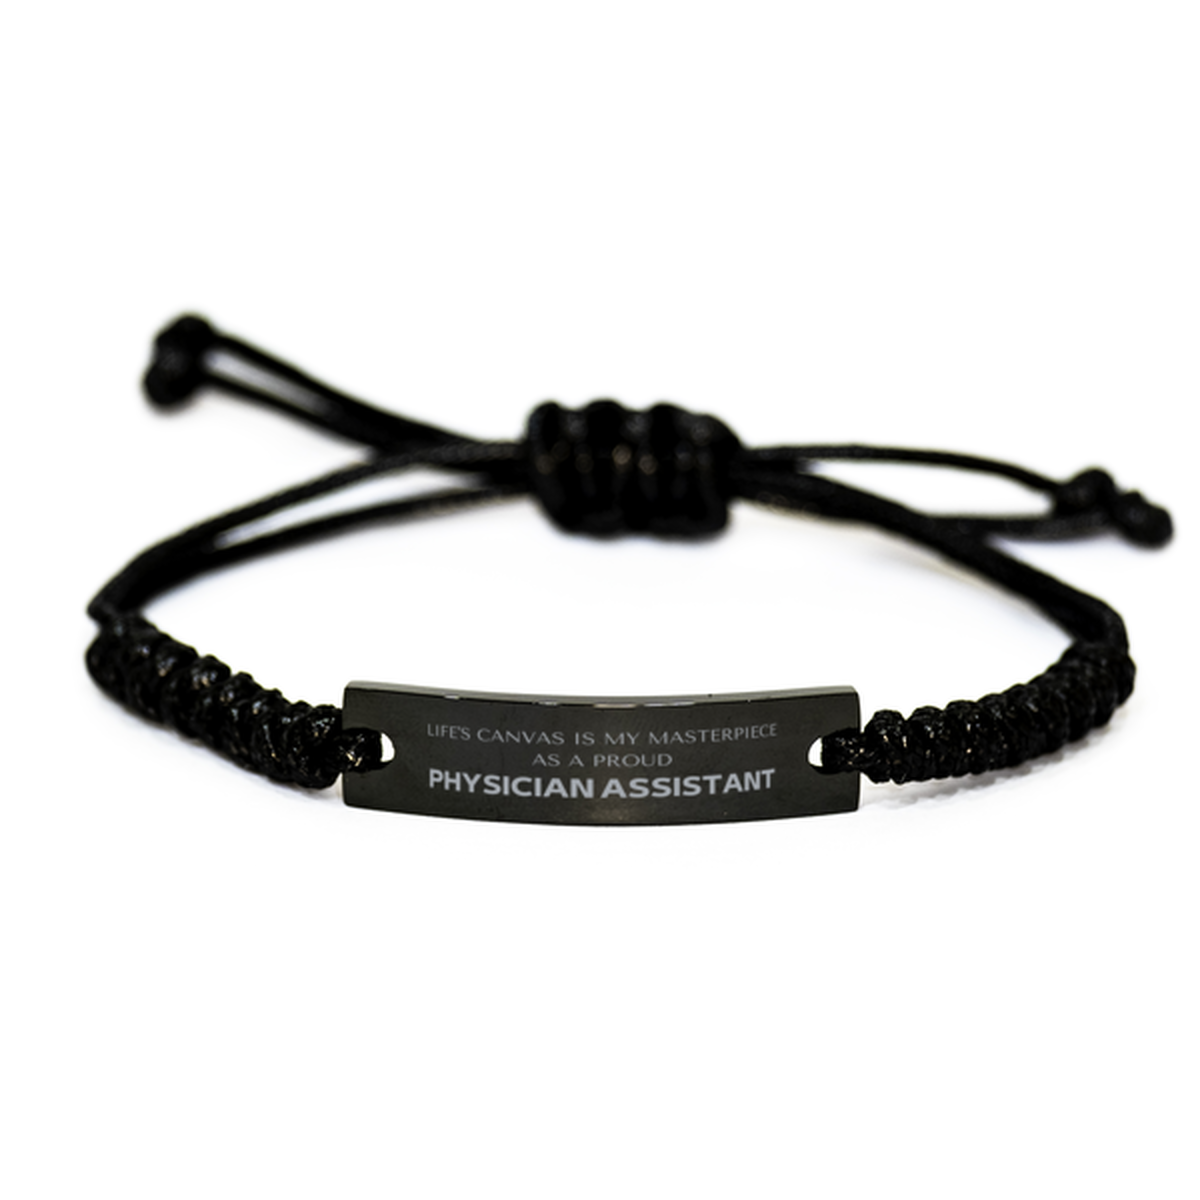 Proud Physician Assistant Gifts, Life's canvas is my masterpiece, Epic Birthday Christmas Unique Black Rope Bracelet For Physician Assistant, Coworkers, Men, Women, Friends